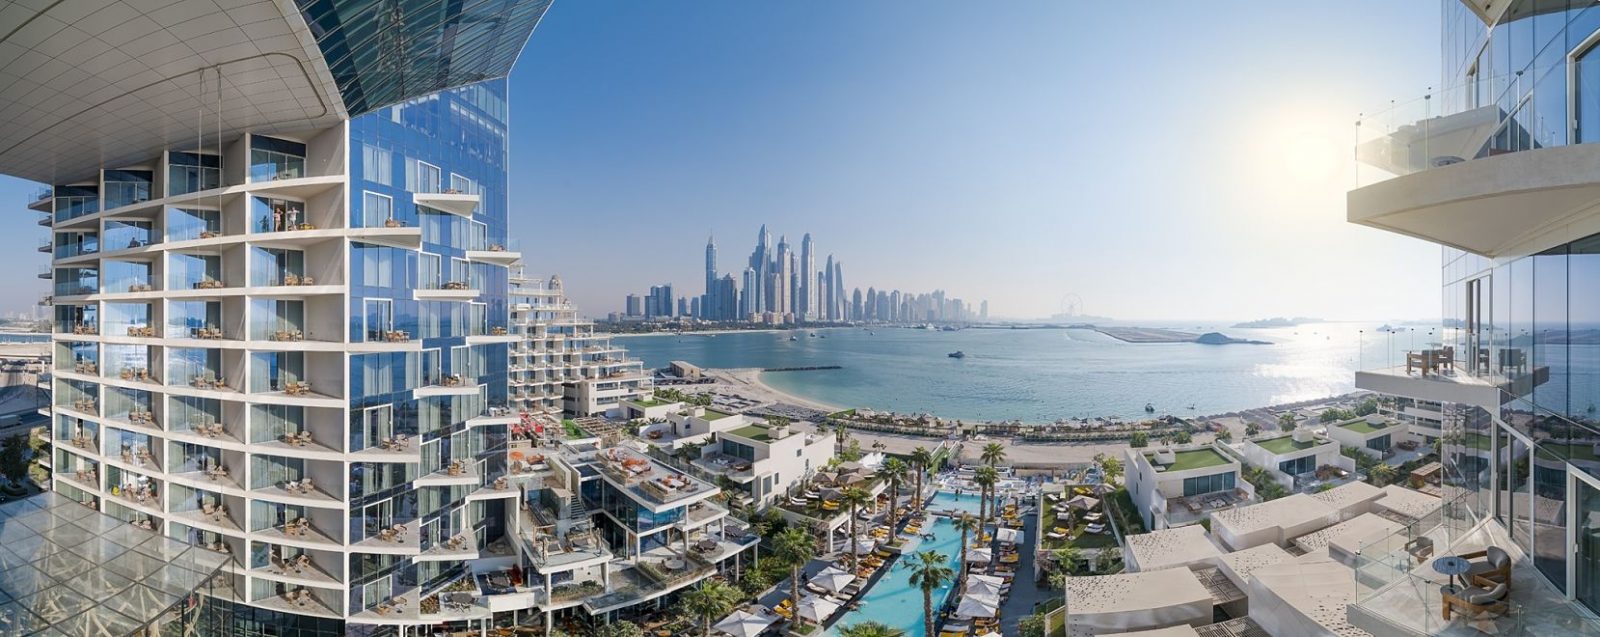 Image courtesy of Five Palm Jumeirah 